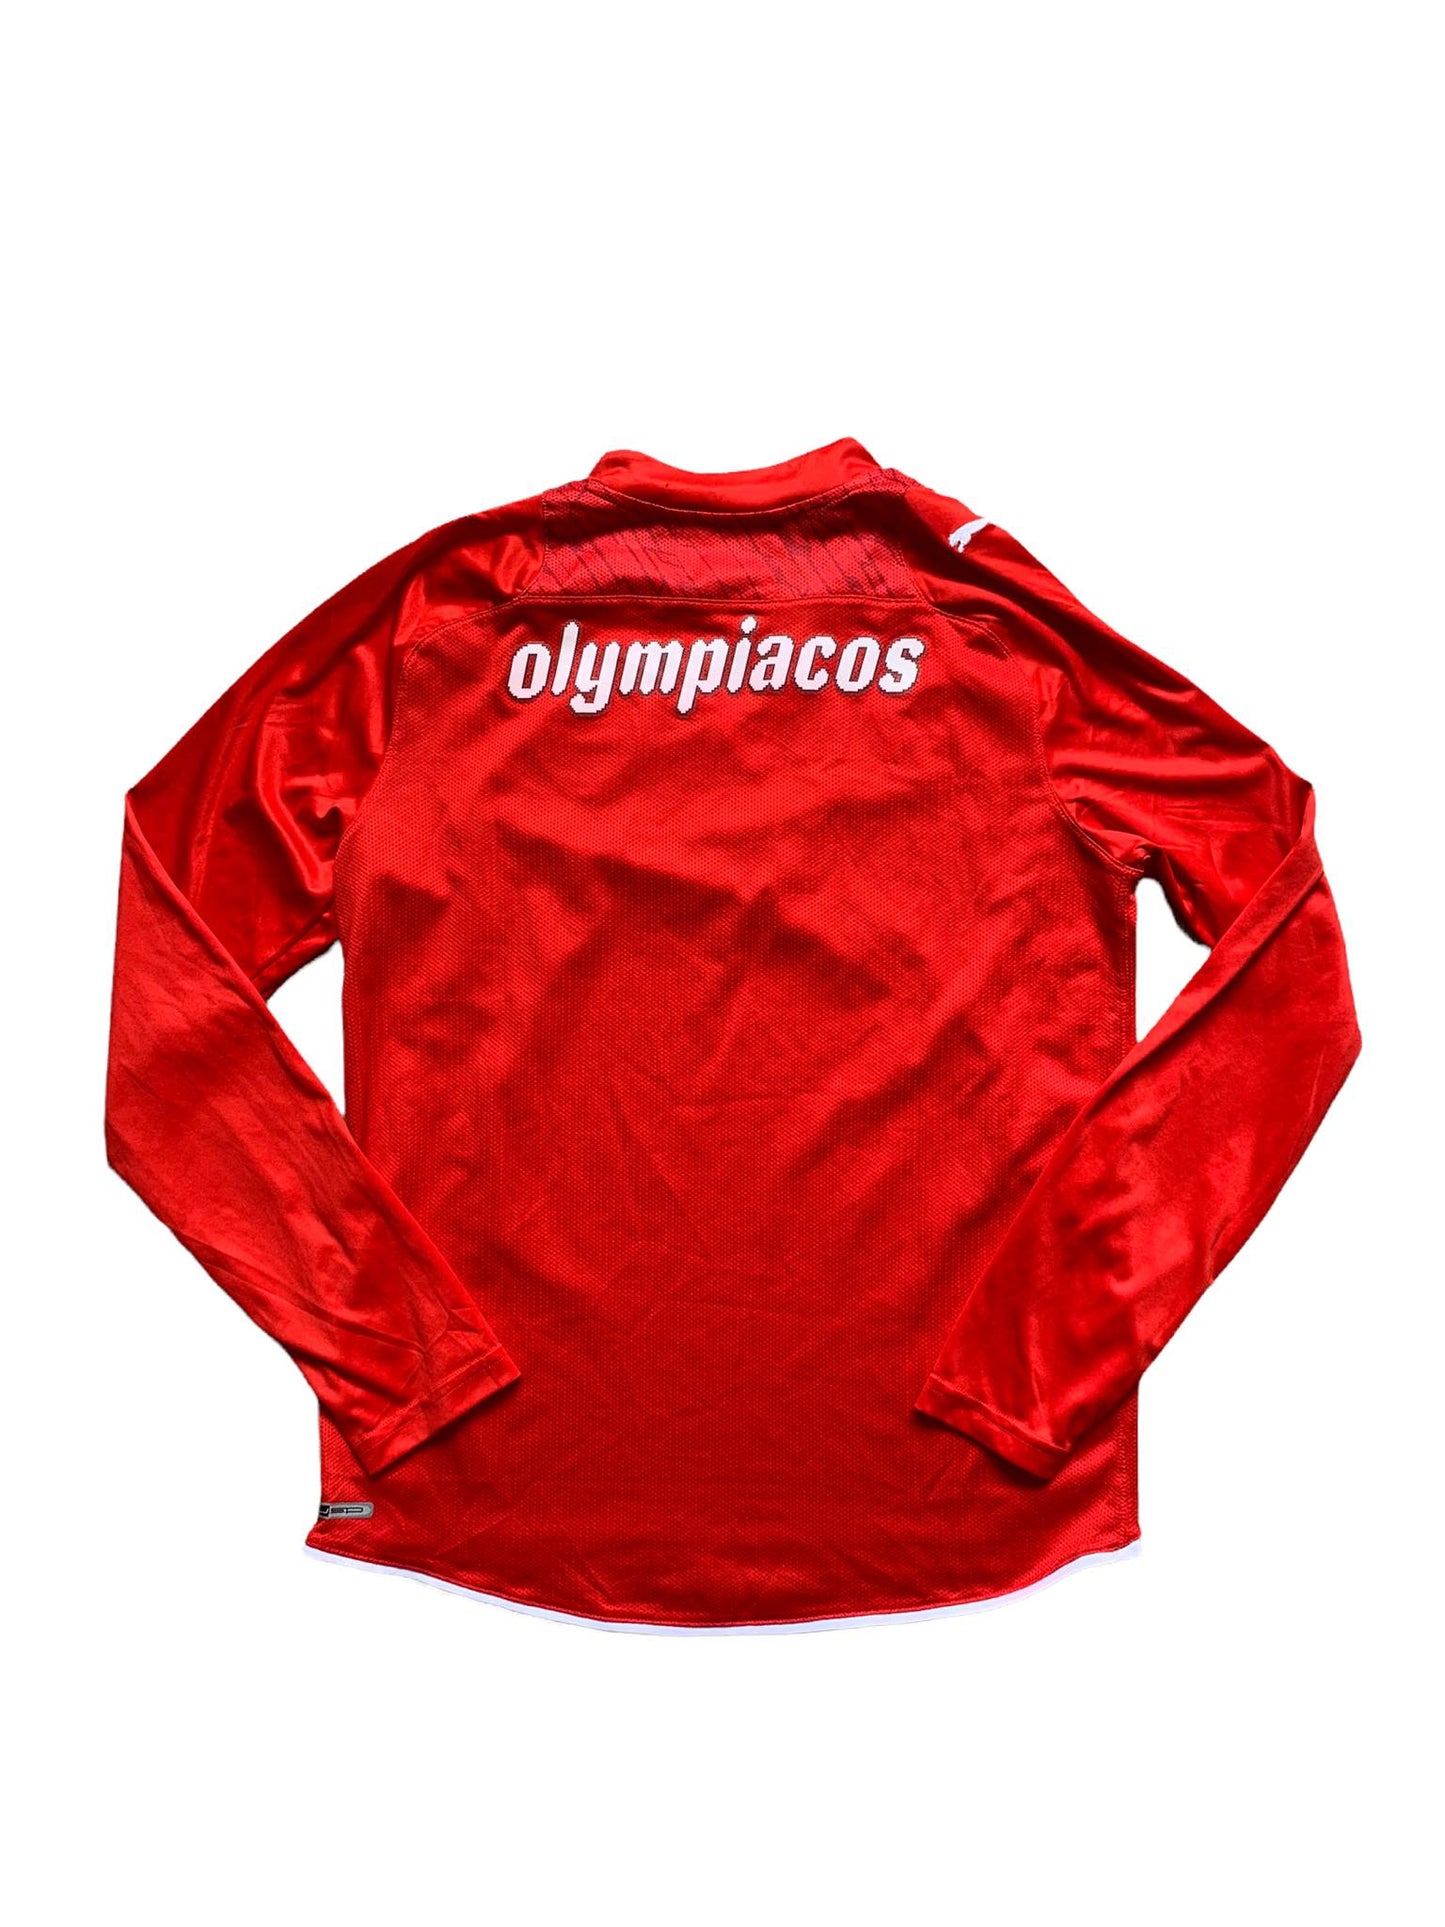 Olympiacos 2009/10 Long-Sleeve Cup Edition Shirt (M)